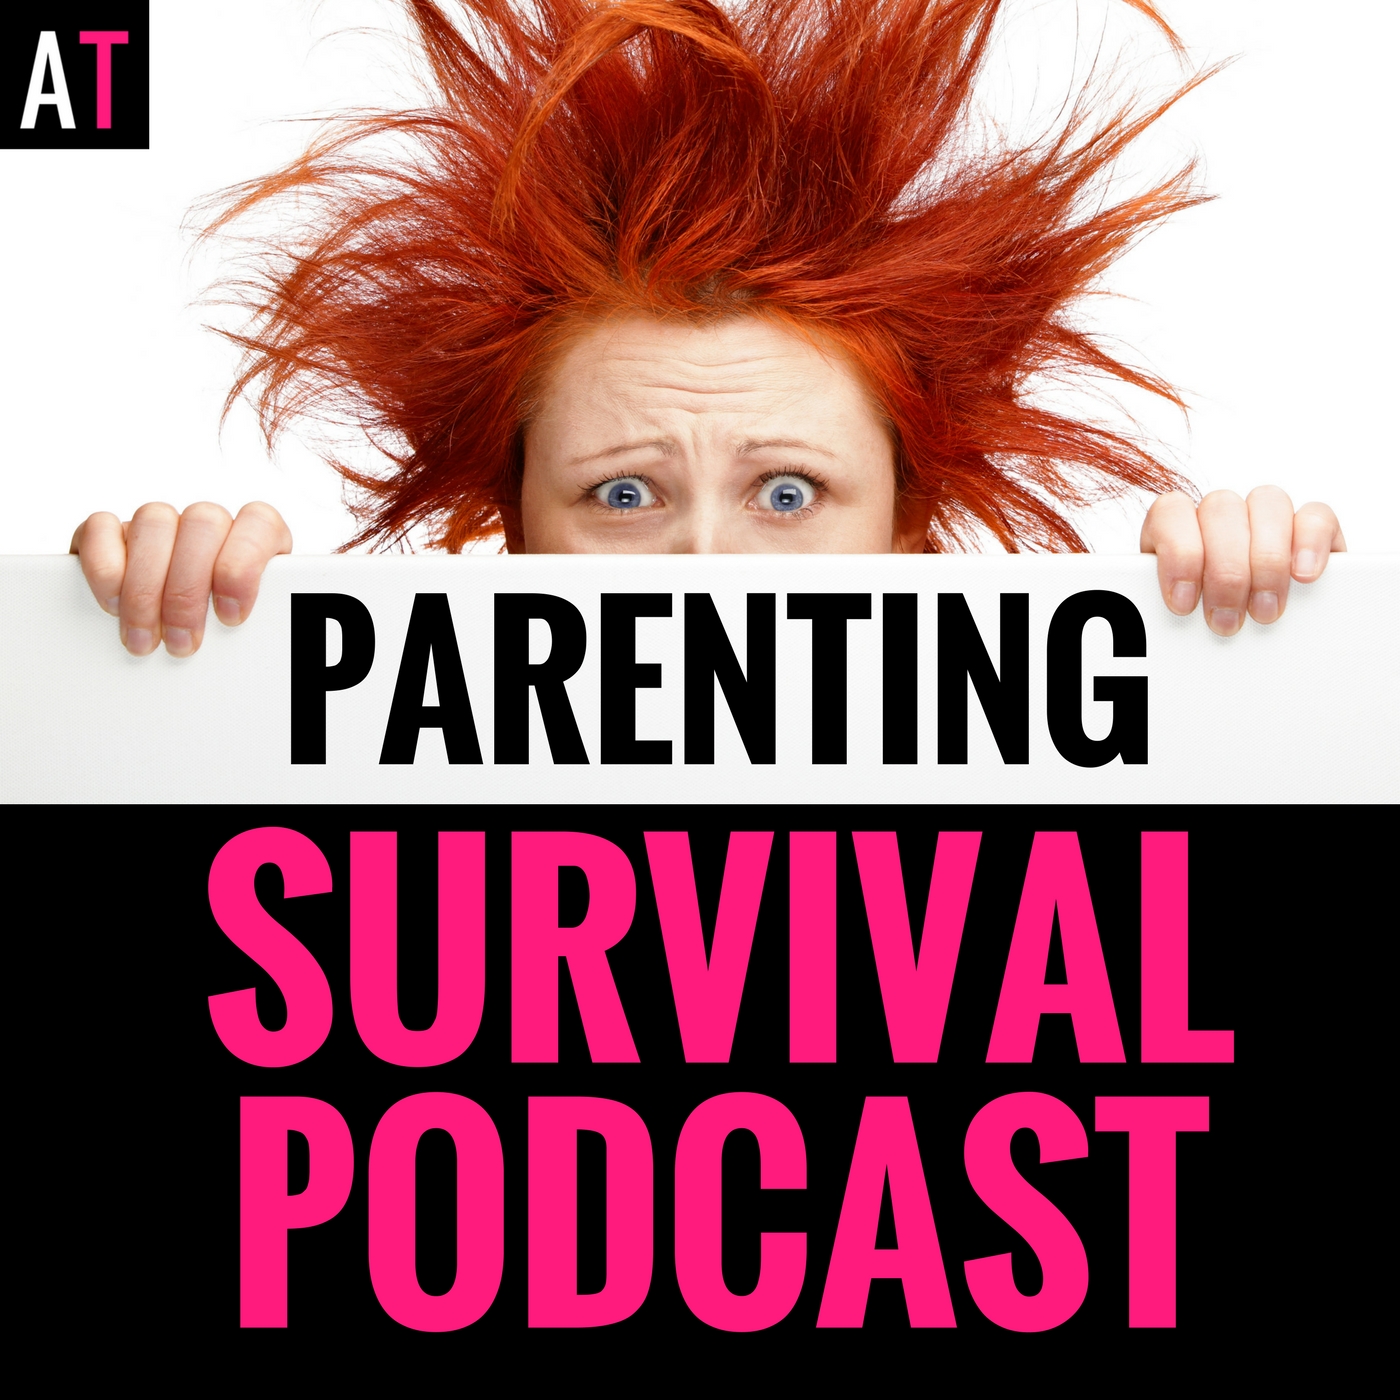 AT Parenting Survival Podcast: Parenting - Child Anxiety - Child OCD - Kids & Family